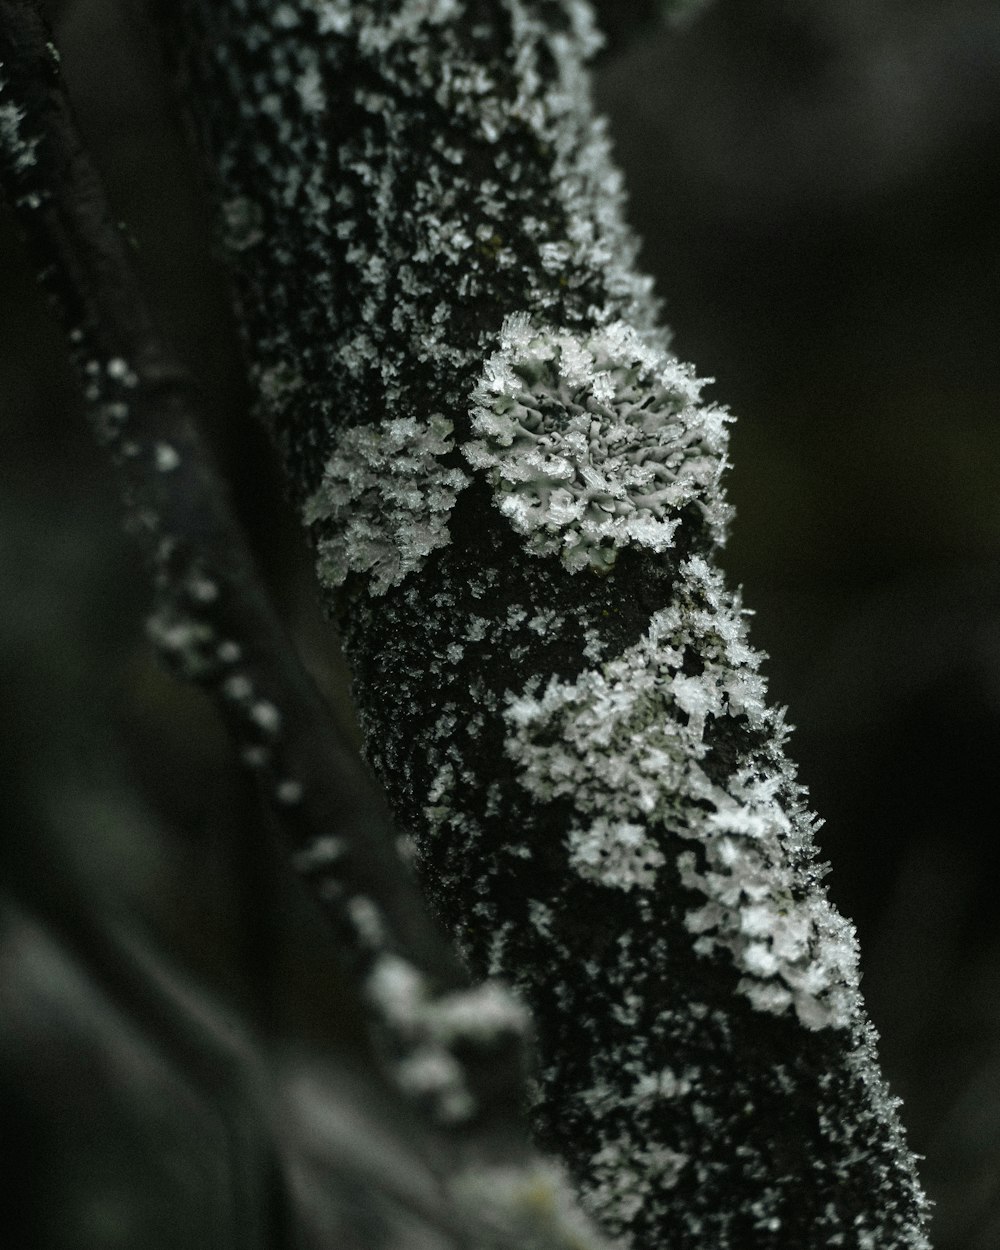 a close up of a tree branch with lichen on it